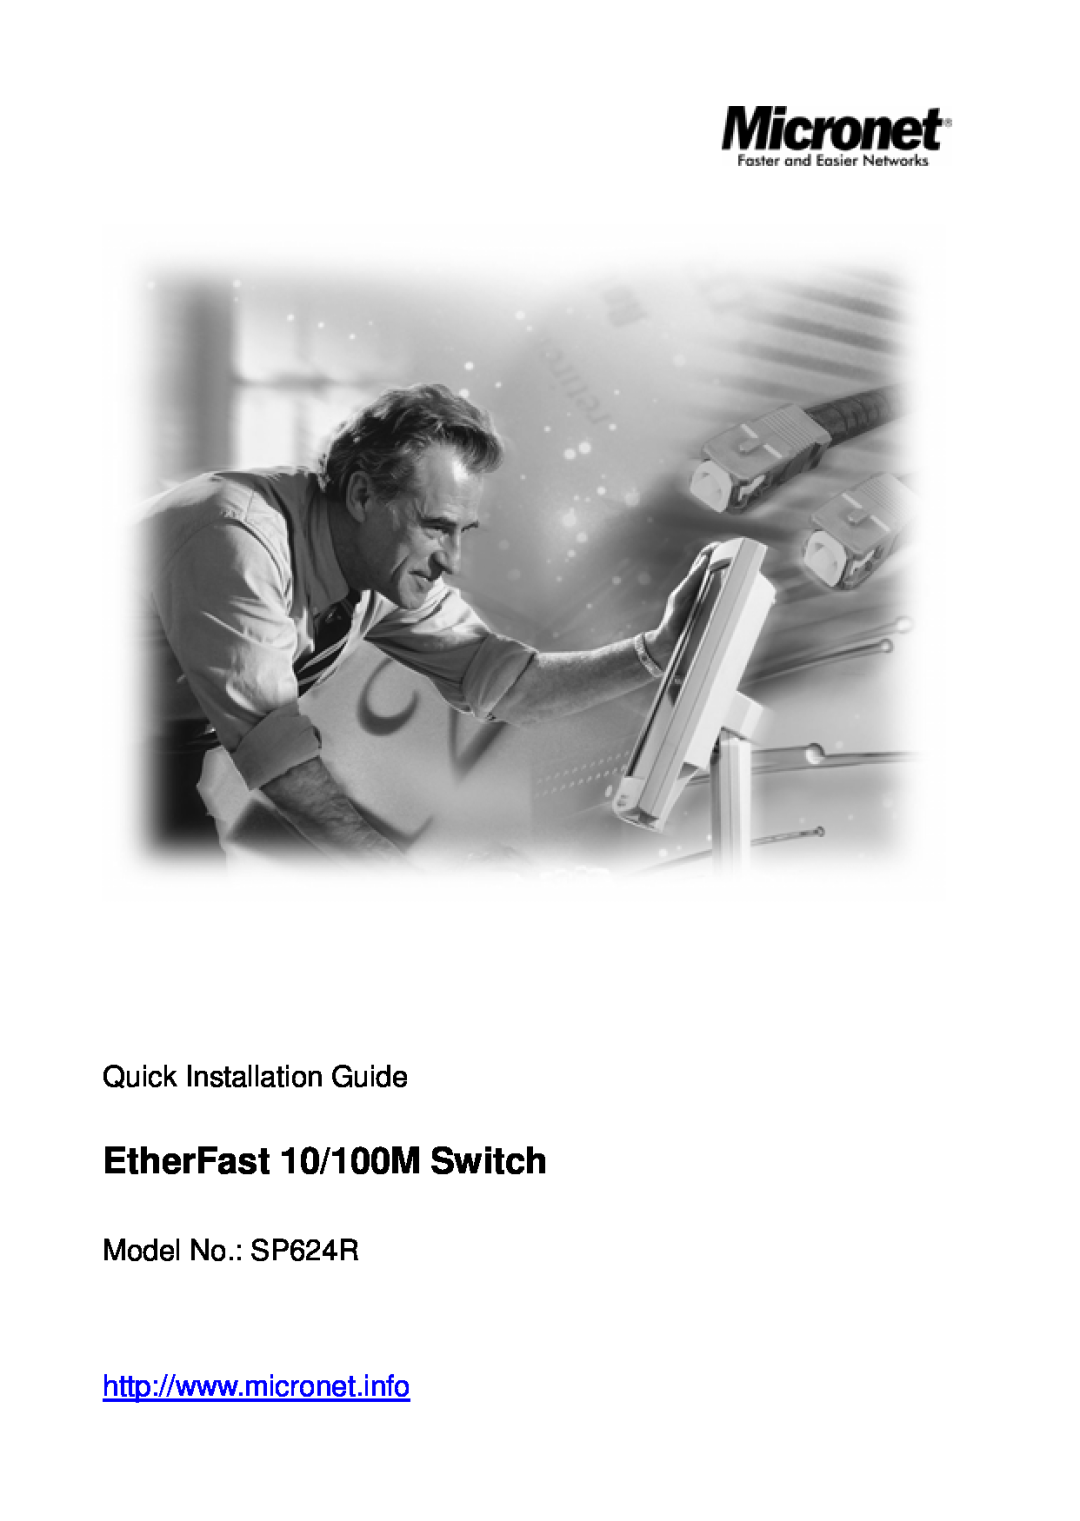 MicroNet Technology manual EtherFast 10/100M Switch, Quick Installation Guide, Model No. SP624R 